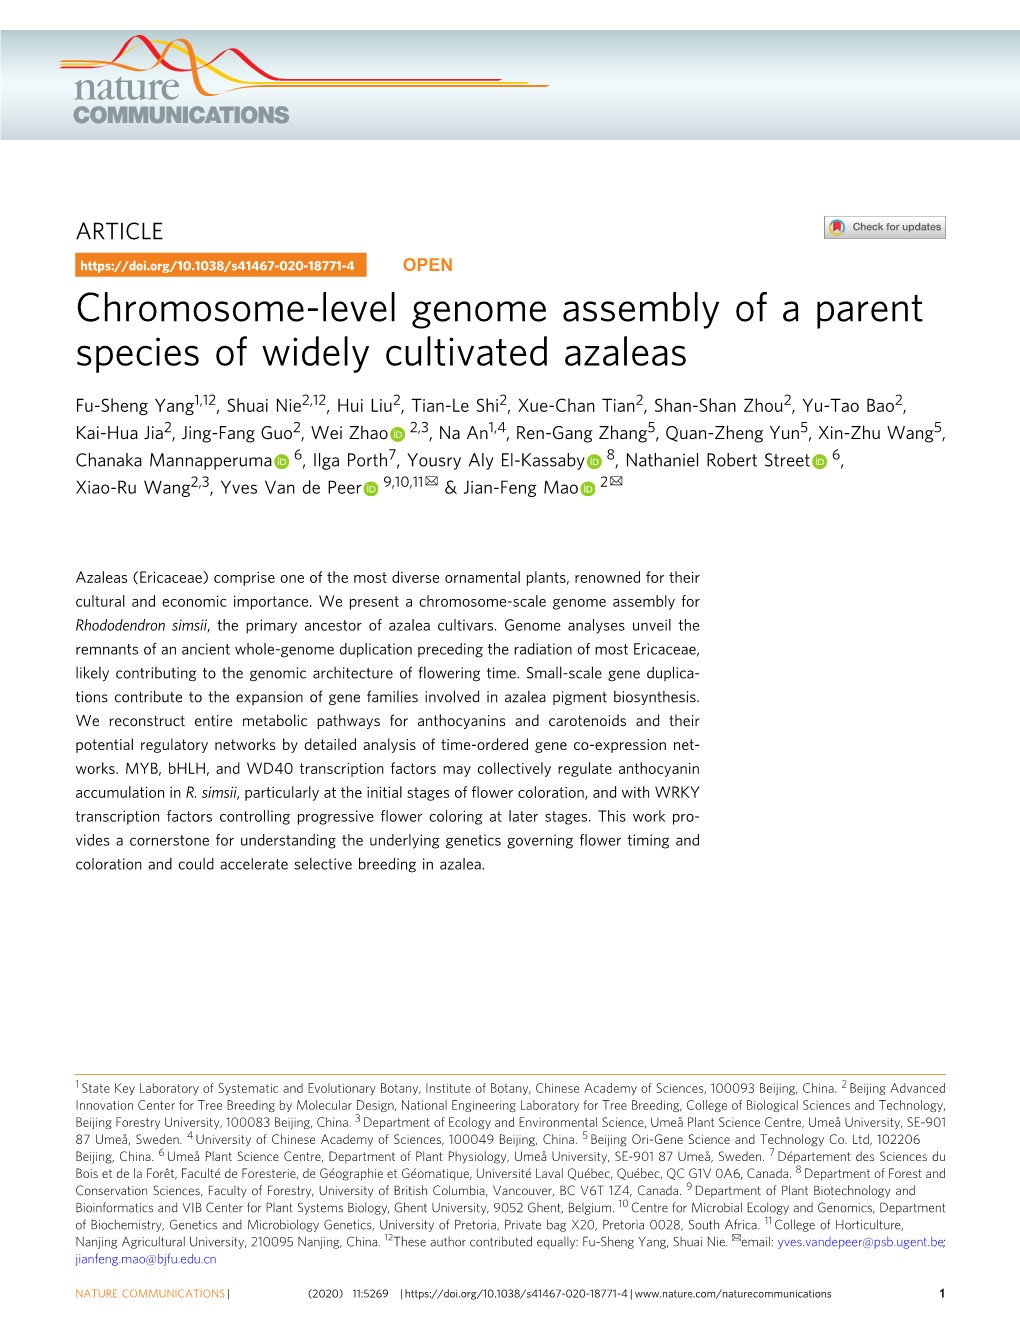 Chromosome-Level Genome Assembly of a Parent Species of Widely Cultivated Azaleas